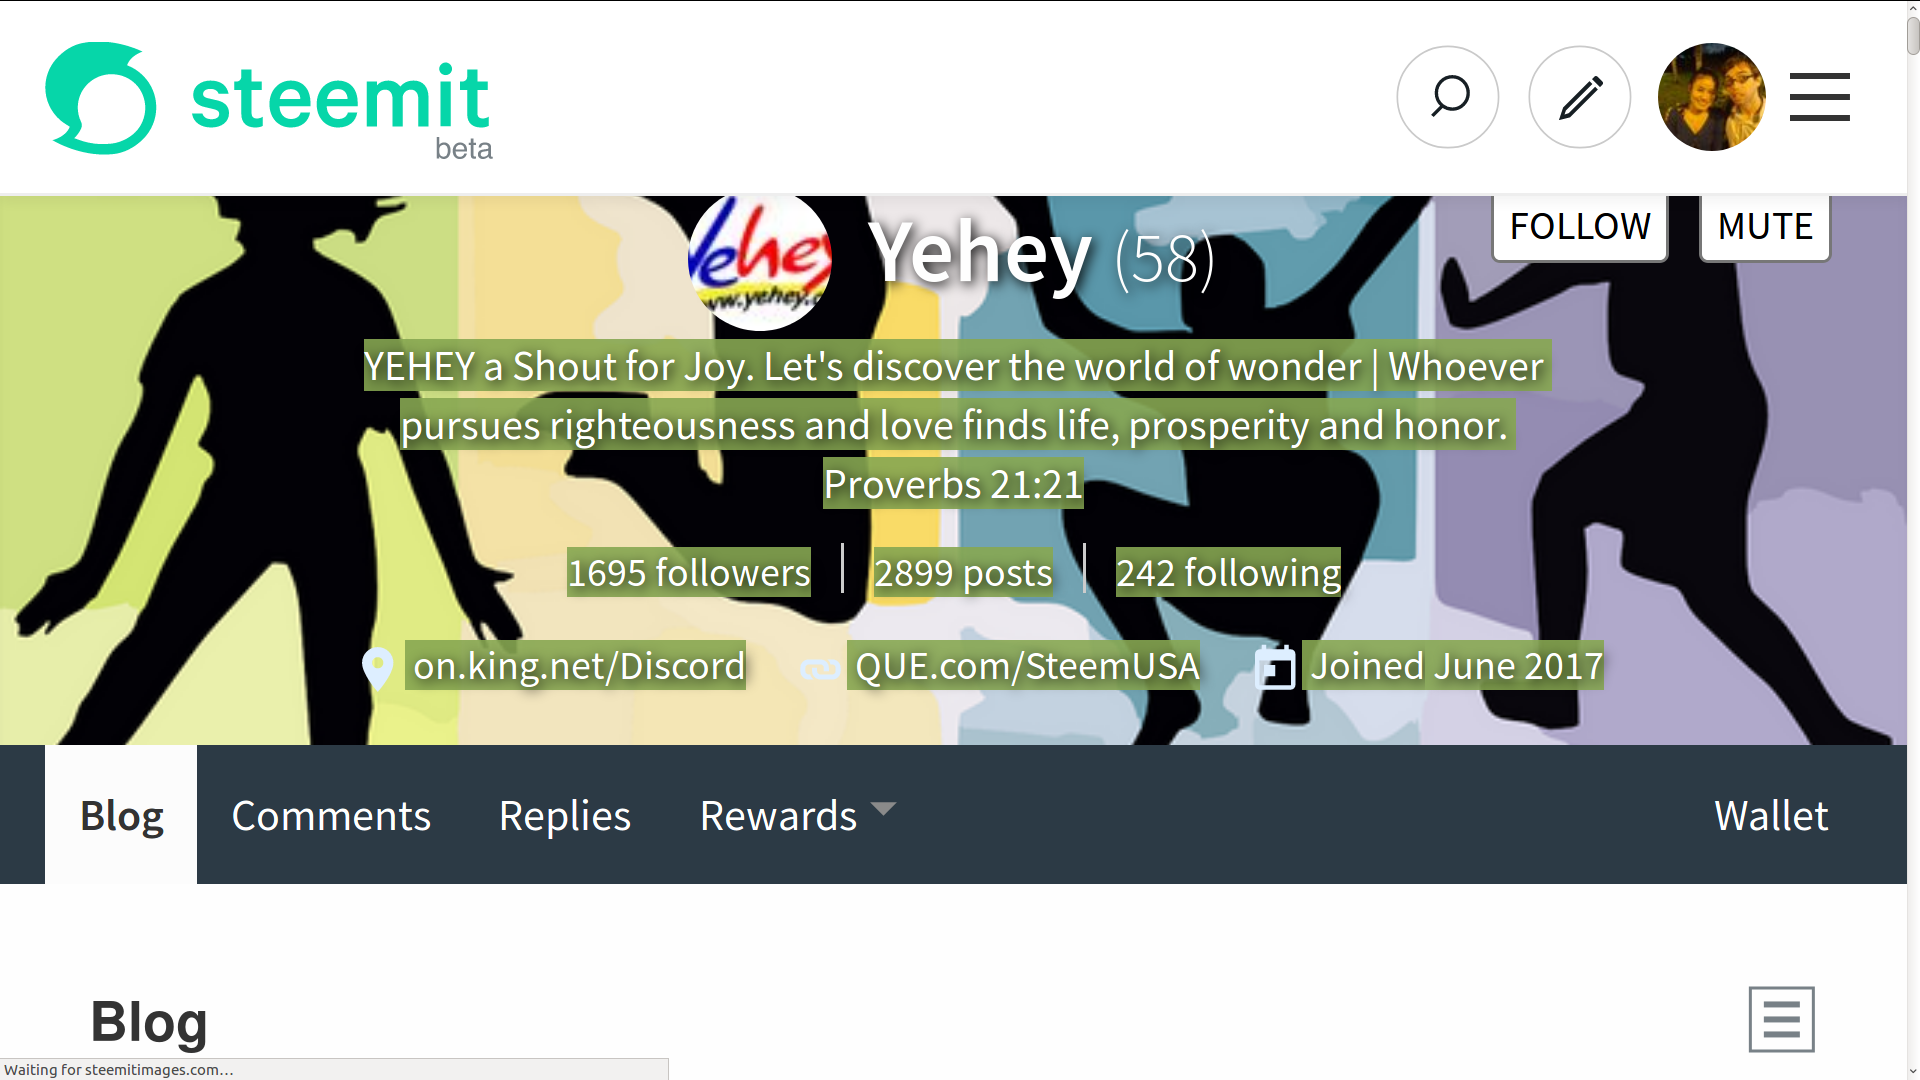 YEHEY of STEEMING.COM  and QUE.COM steemUSA and onKingNet Discord and on Steemit since 2017 June like me JA.png